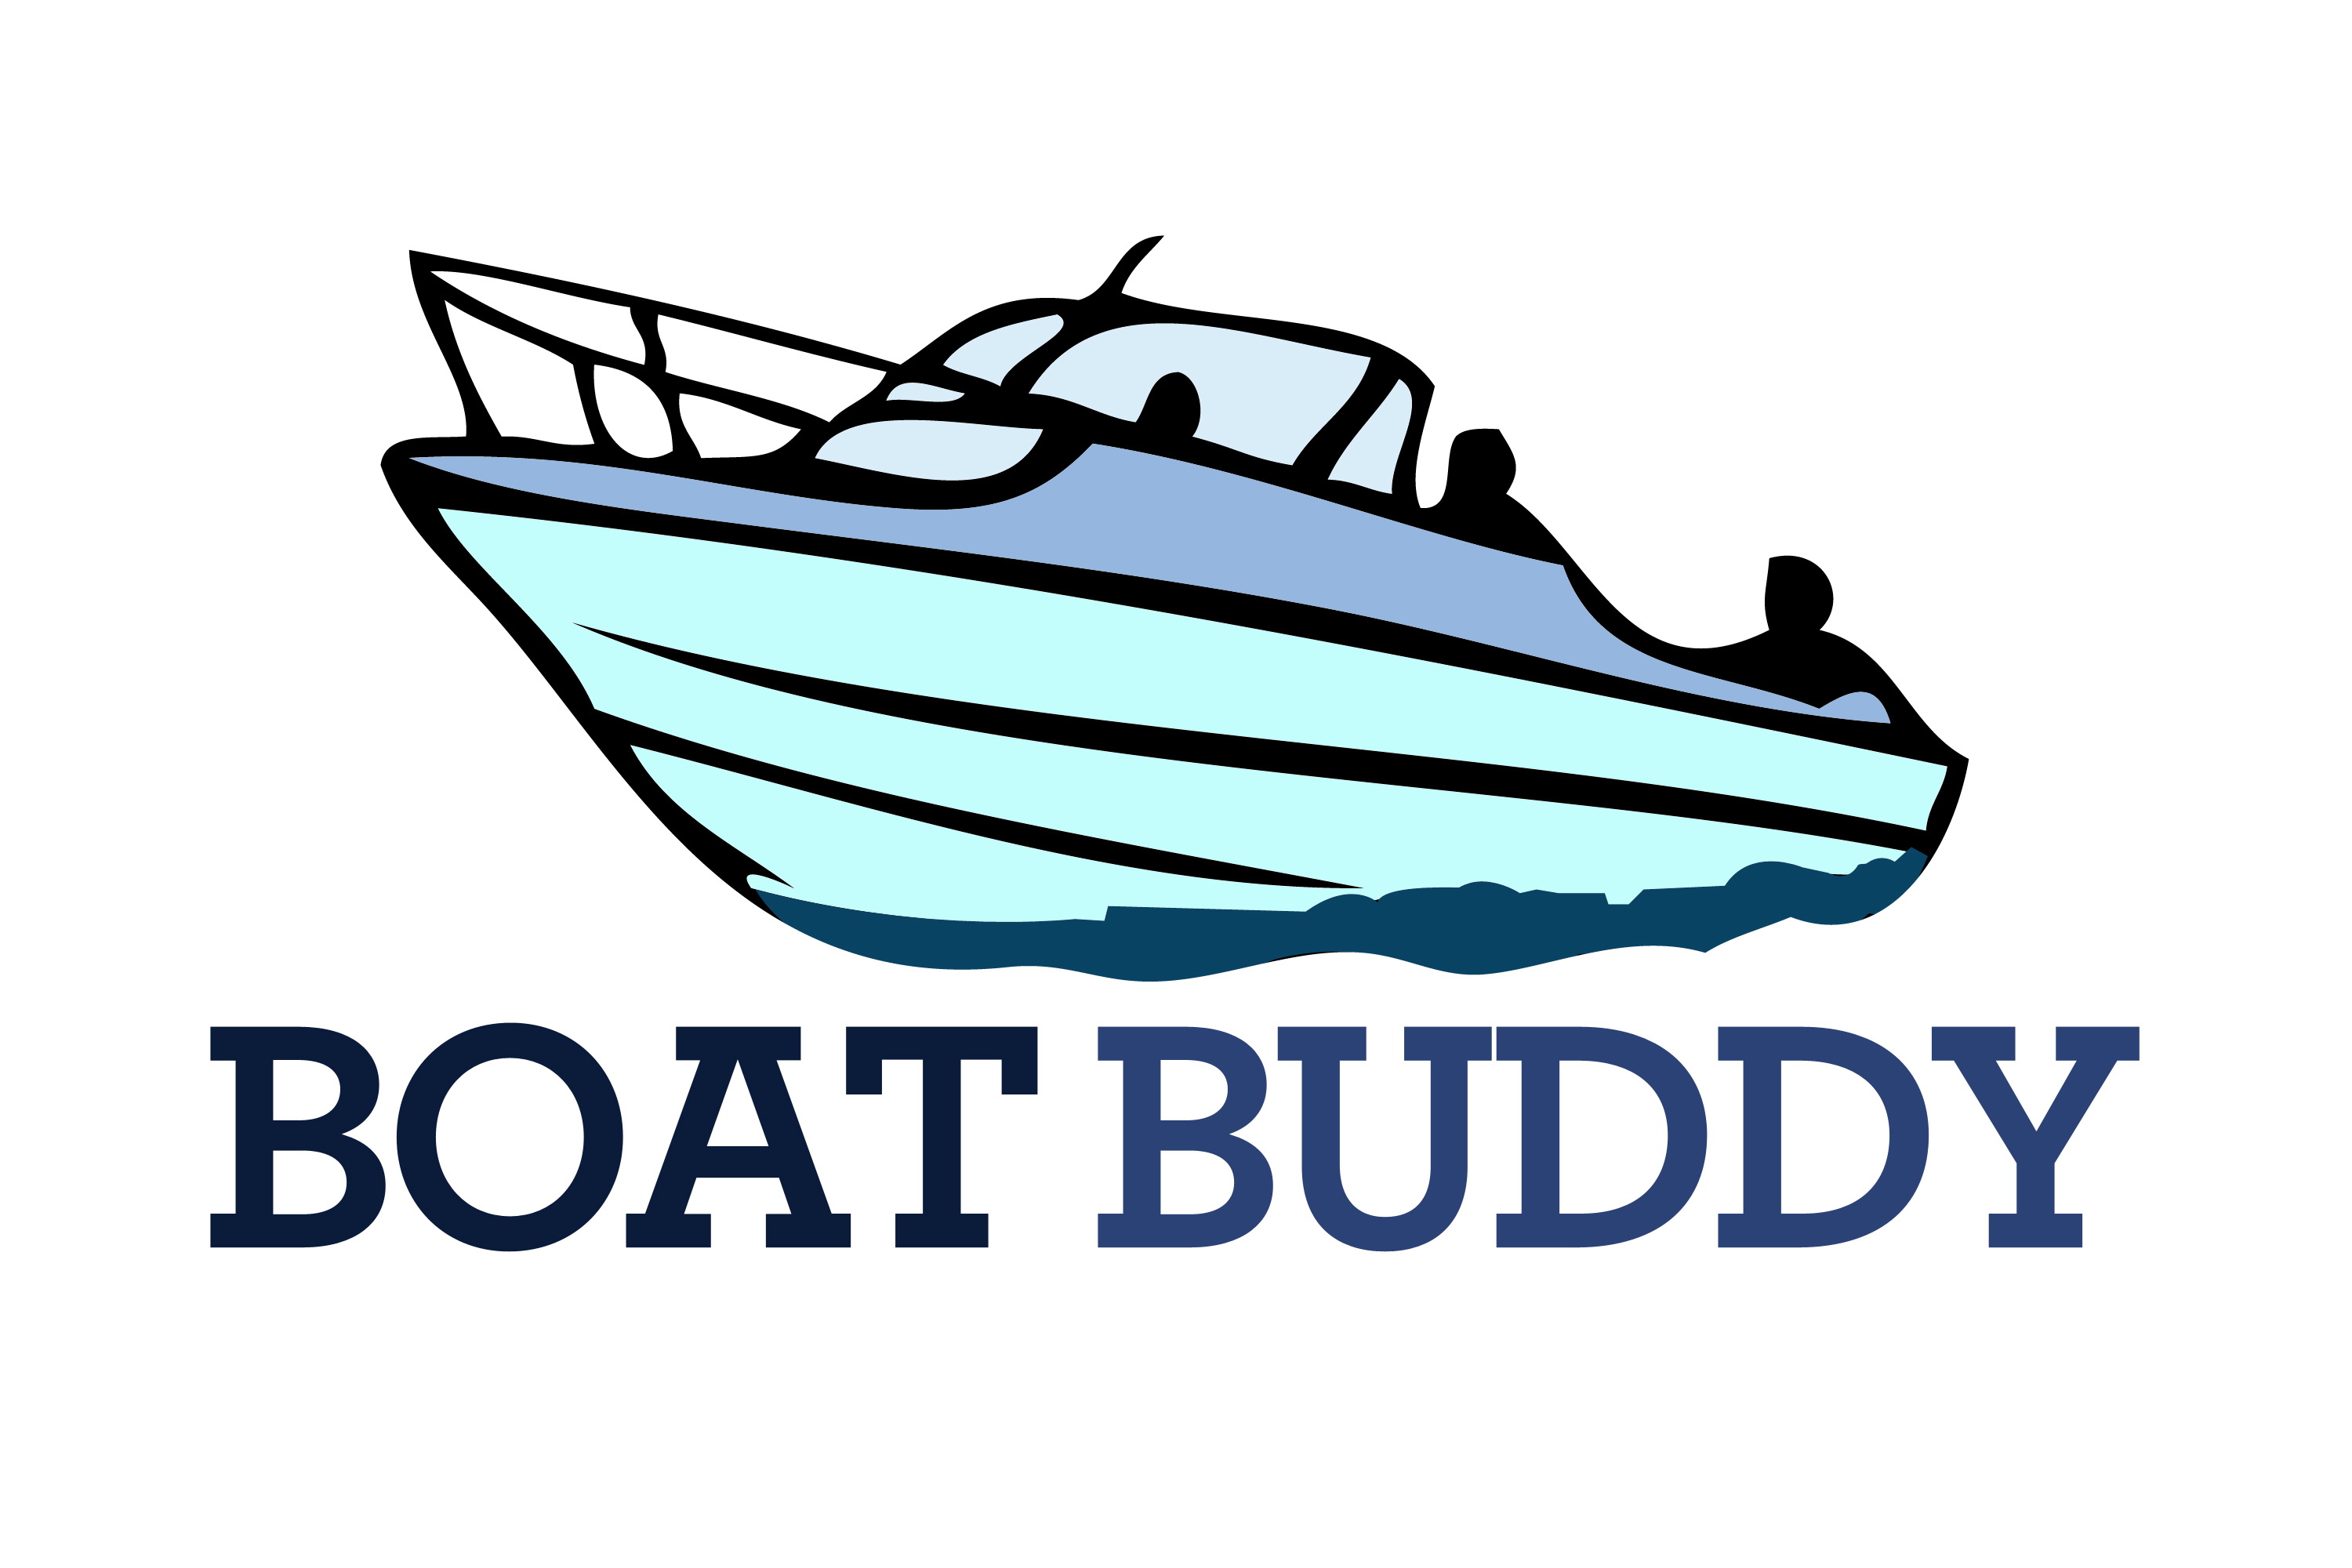 The Boat Buddy is a boating invention which will provide boat owners with a portable means to protect their boats from the outdoor elements anywhere they go.